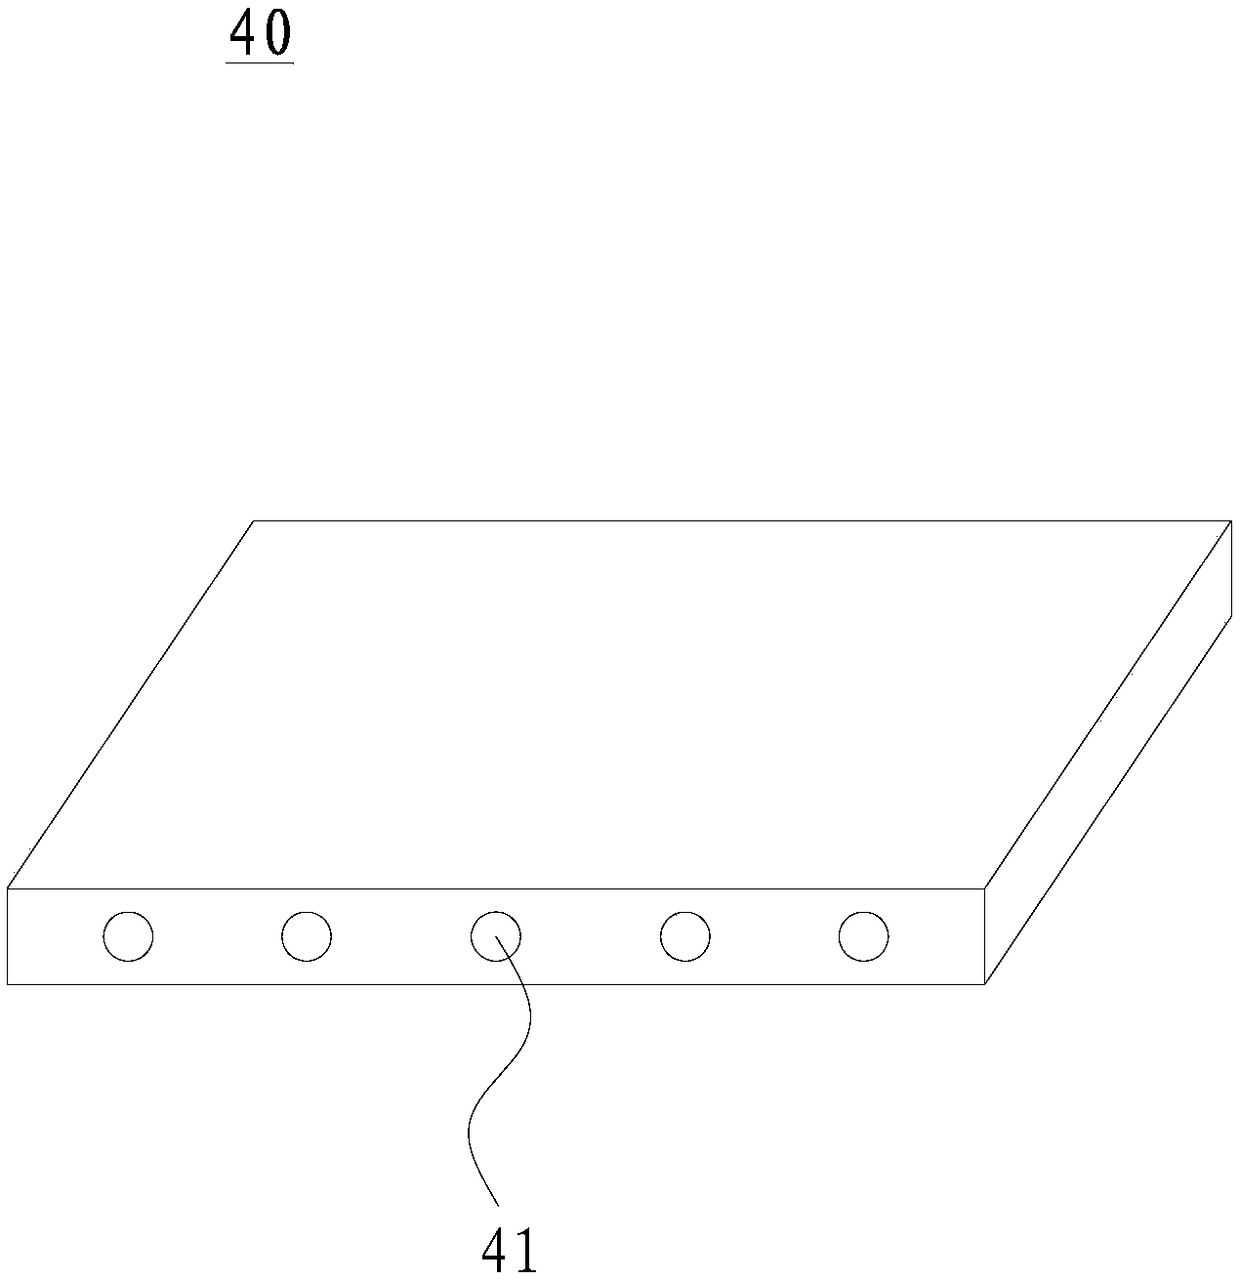 Auxiliary mounting mechanism and method